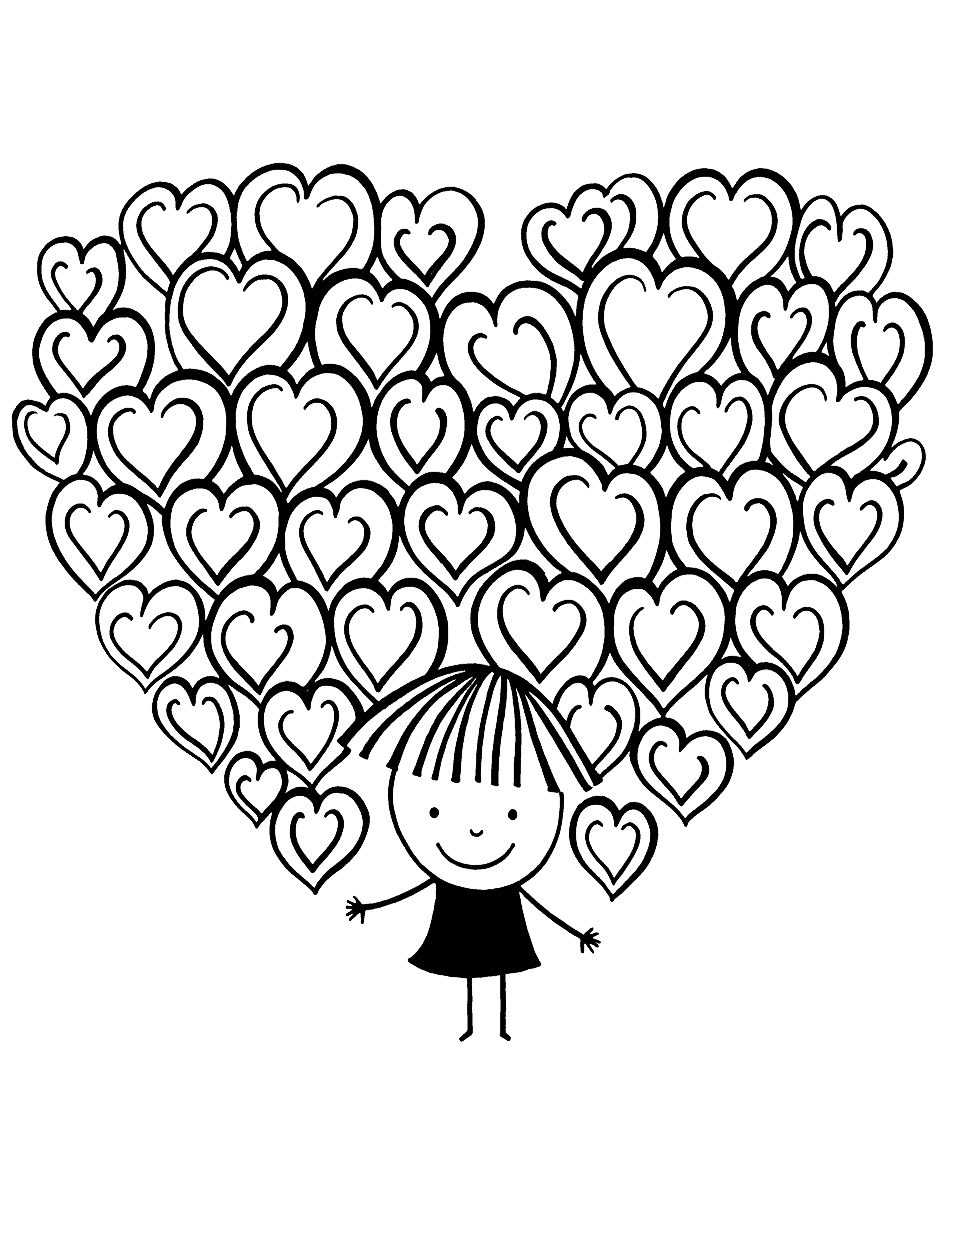 Dancing Hearts Heart Coloring Page - Hearts having fun and dancing around.